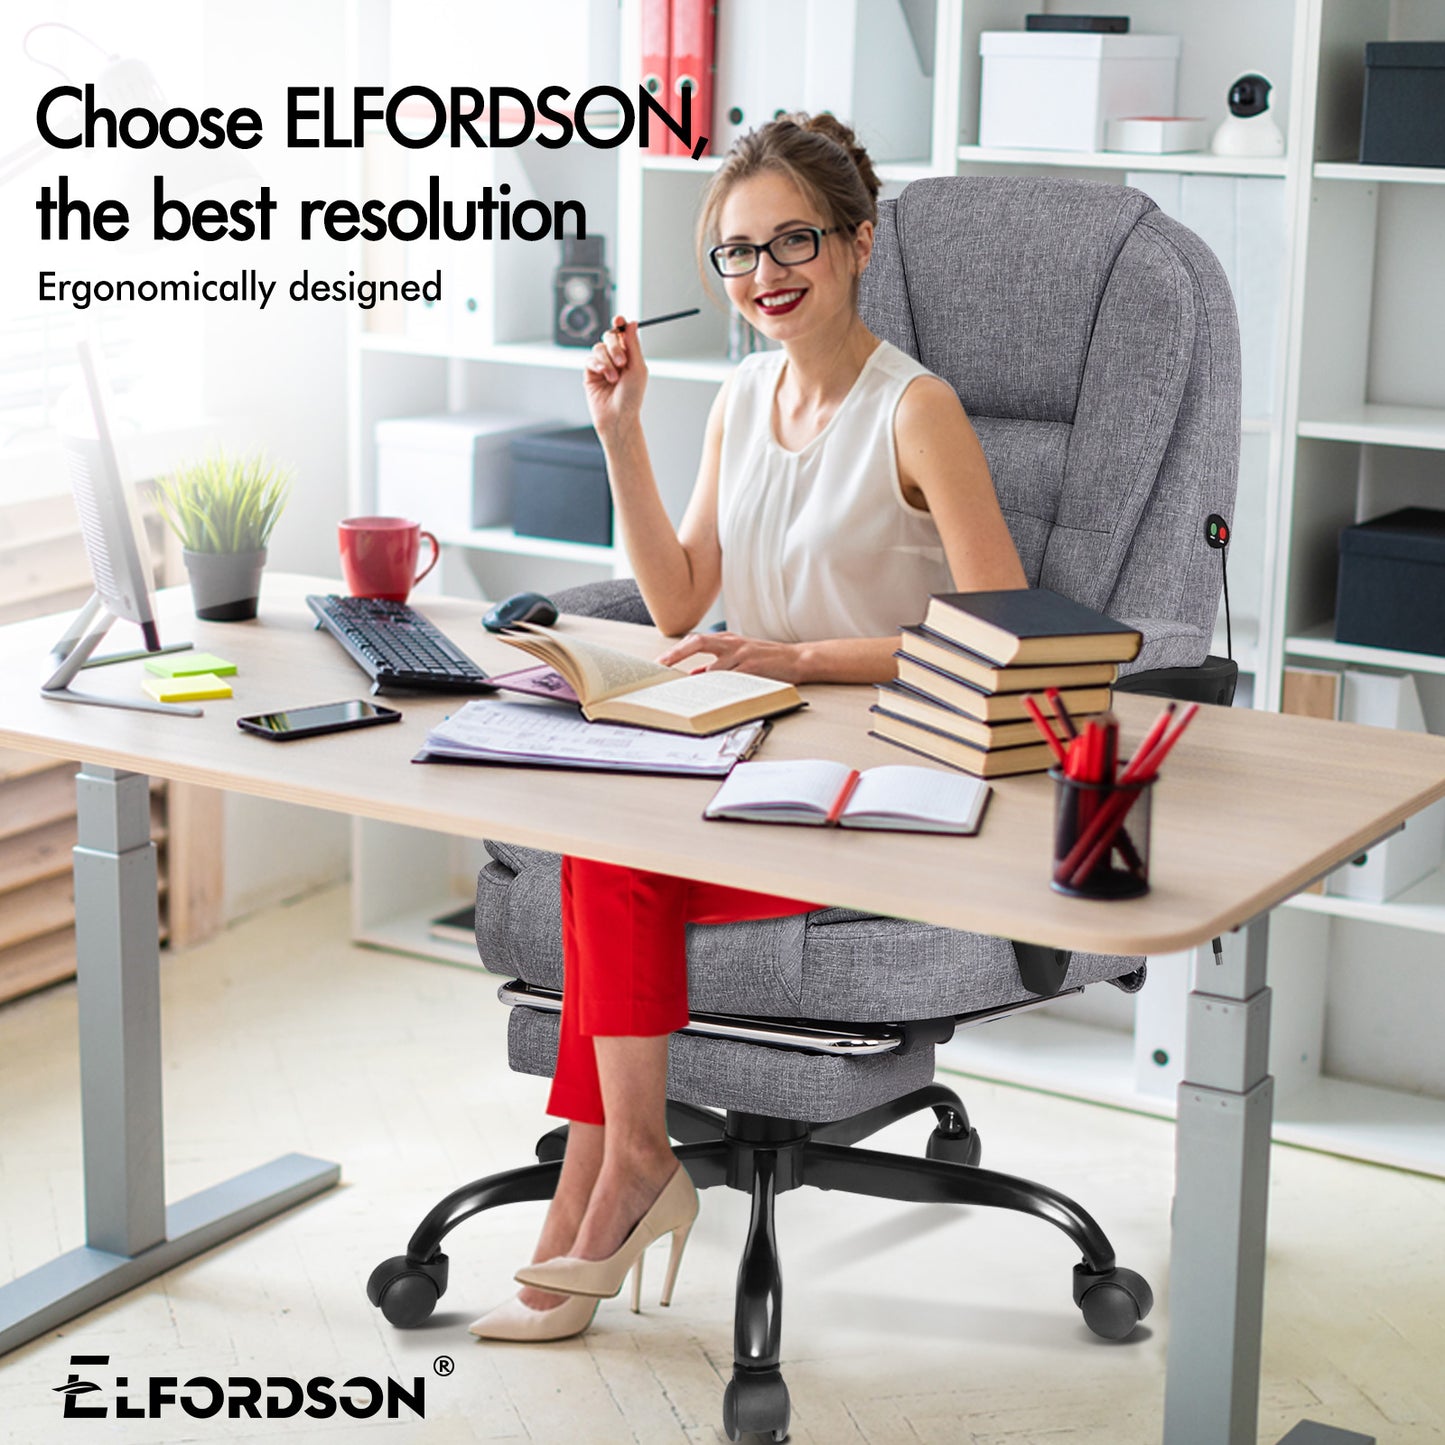 ELFORDSON Massage Office Chair with Footrest Executive Gaming Seat Breathable Fabric Upholstery, Grey